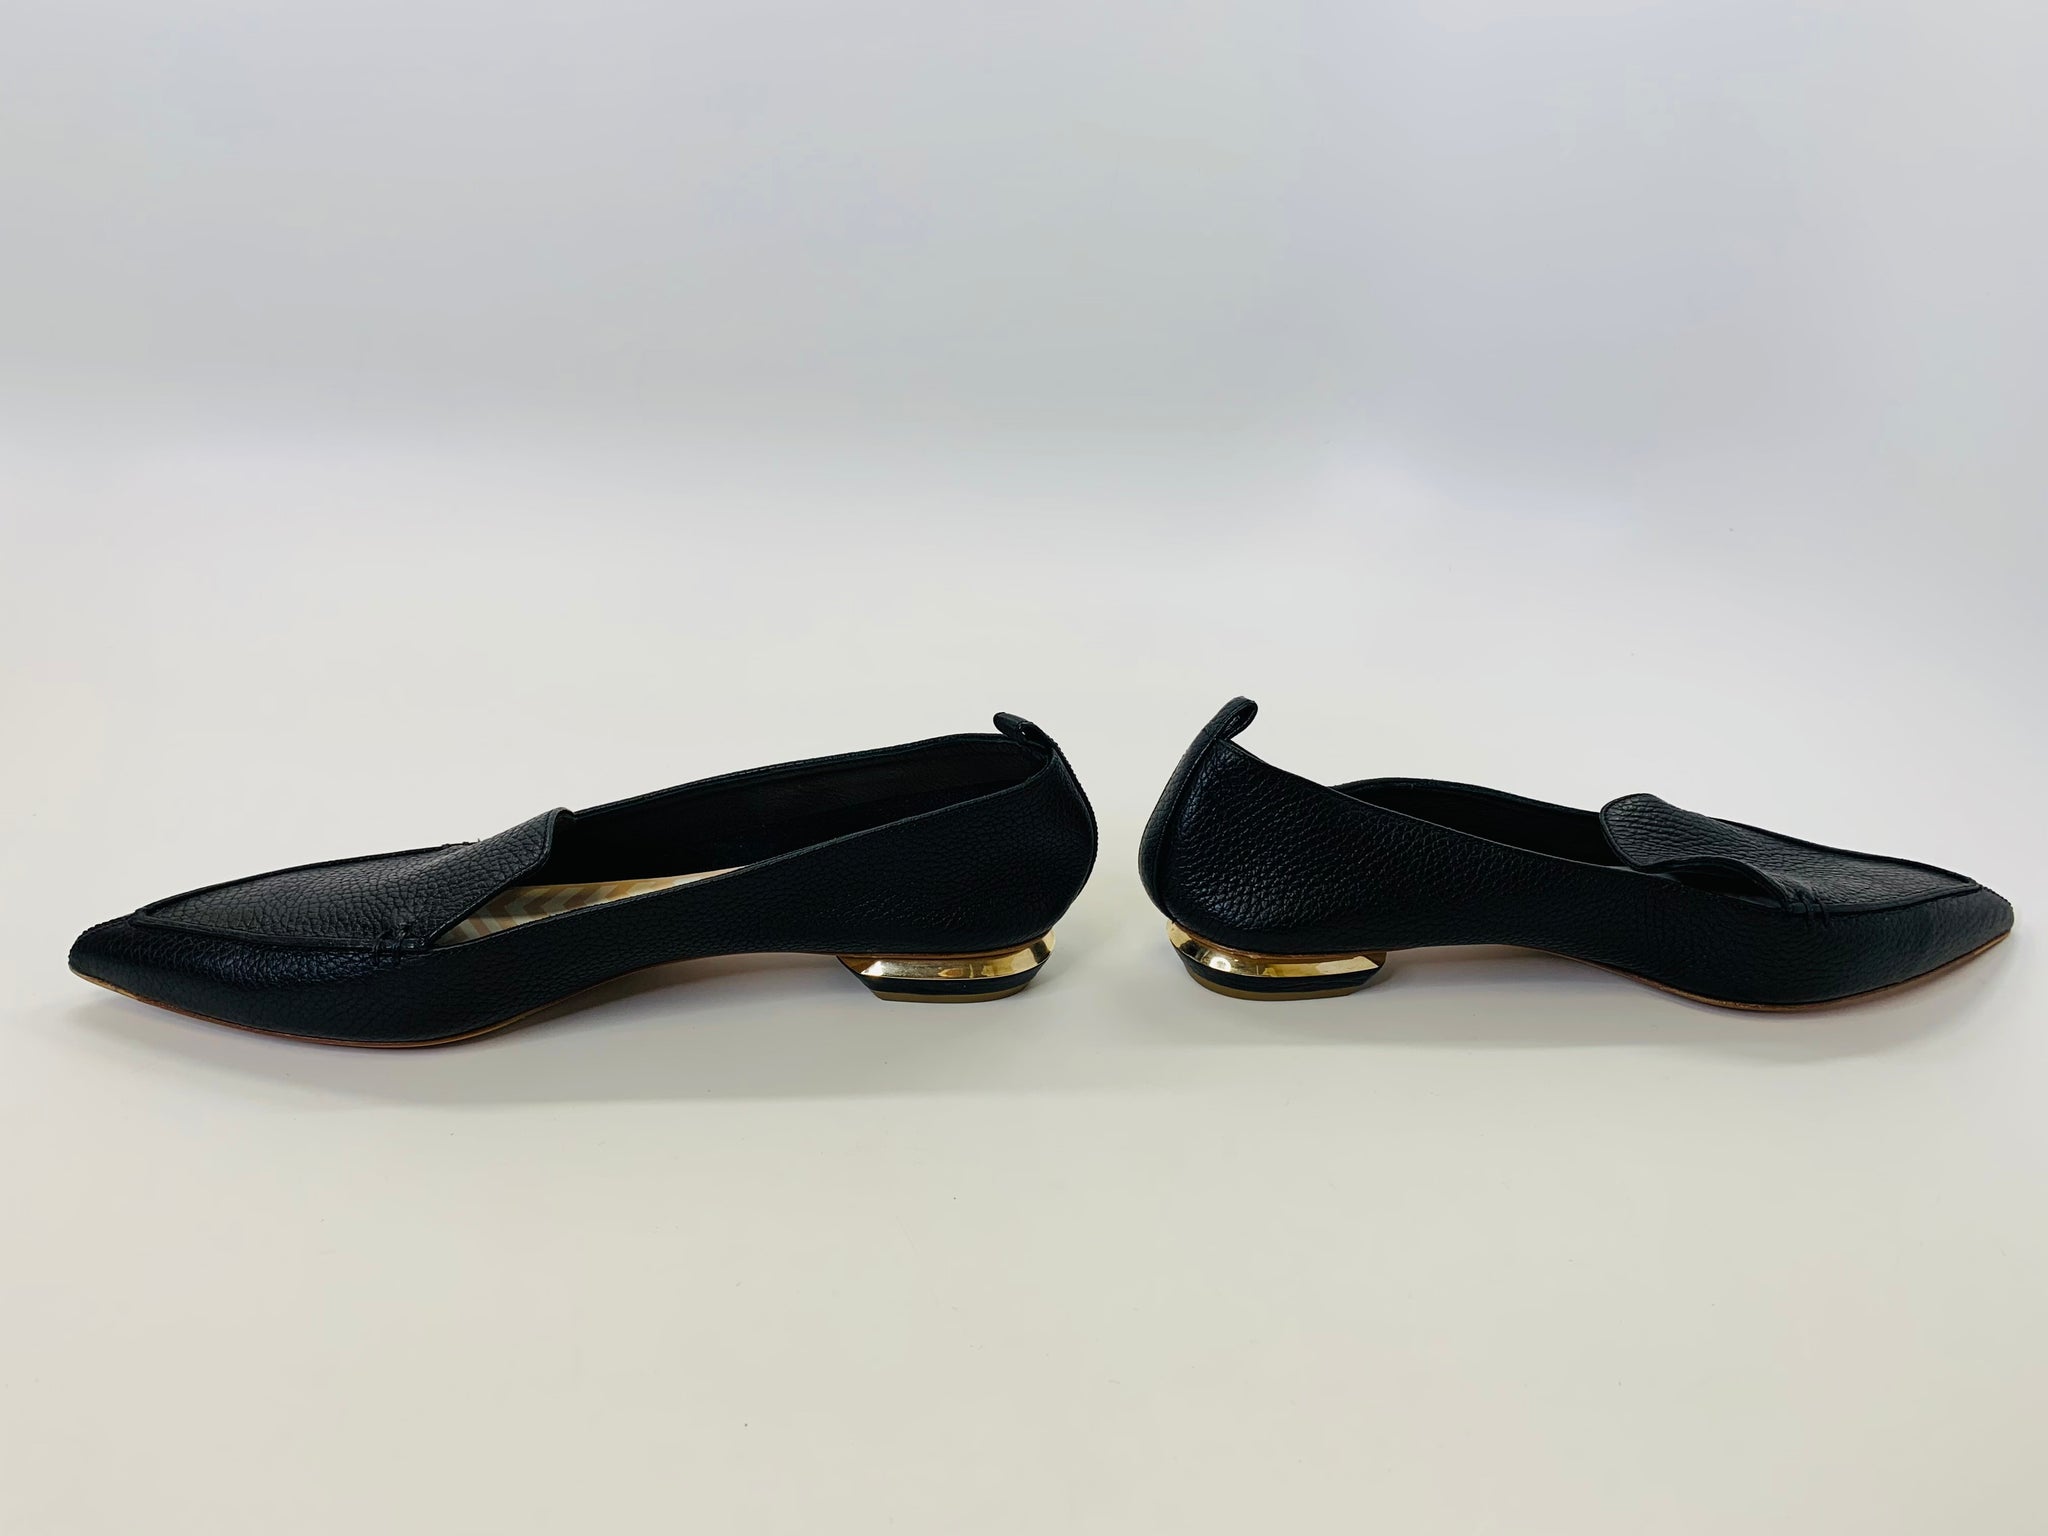 Made in Italy NICHOLAS KIRKWOOD Beya Leather Pointed loafers